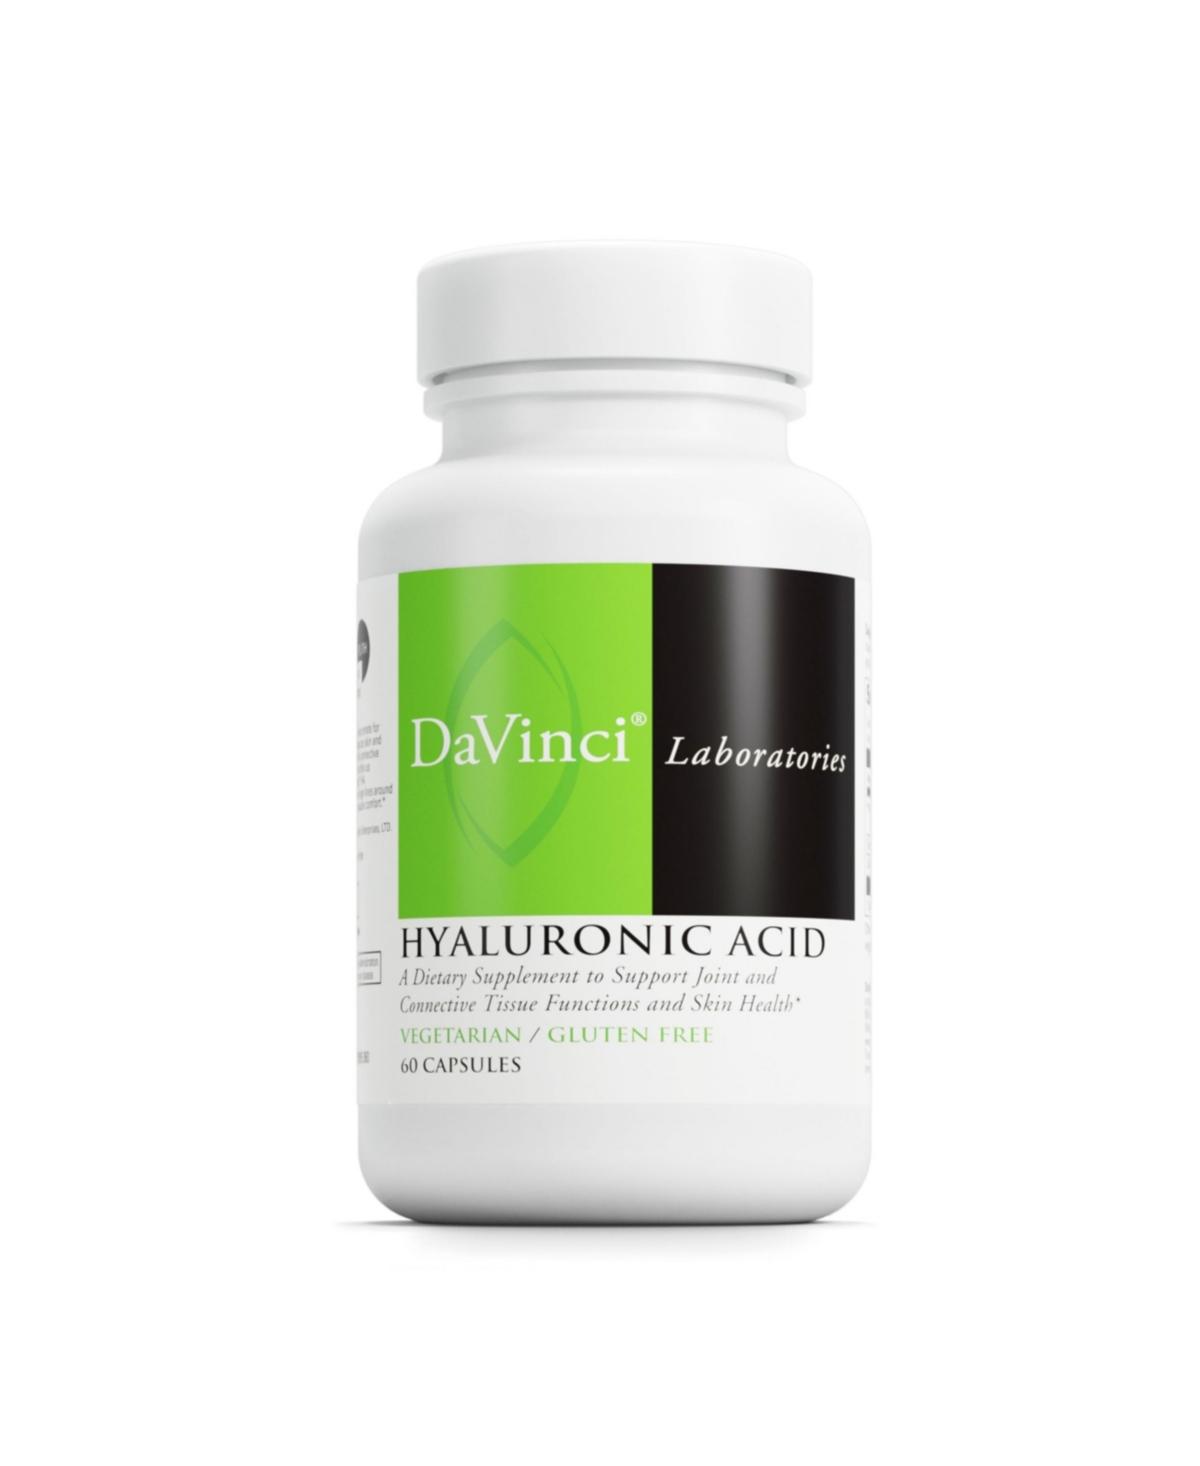 DaVinci Labs Hyaluronic Acid - Dietary Supplement to Support Joint, Cartilage and Skin Health - With Hyaluronic Acid, Sunflower Lecithin and Salvia Hi